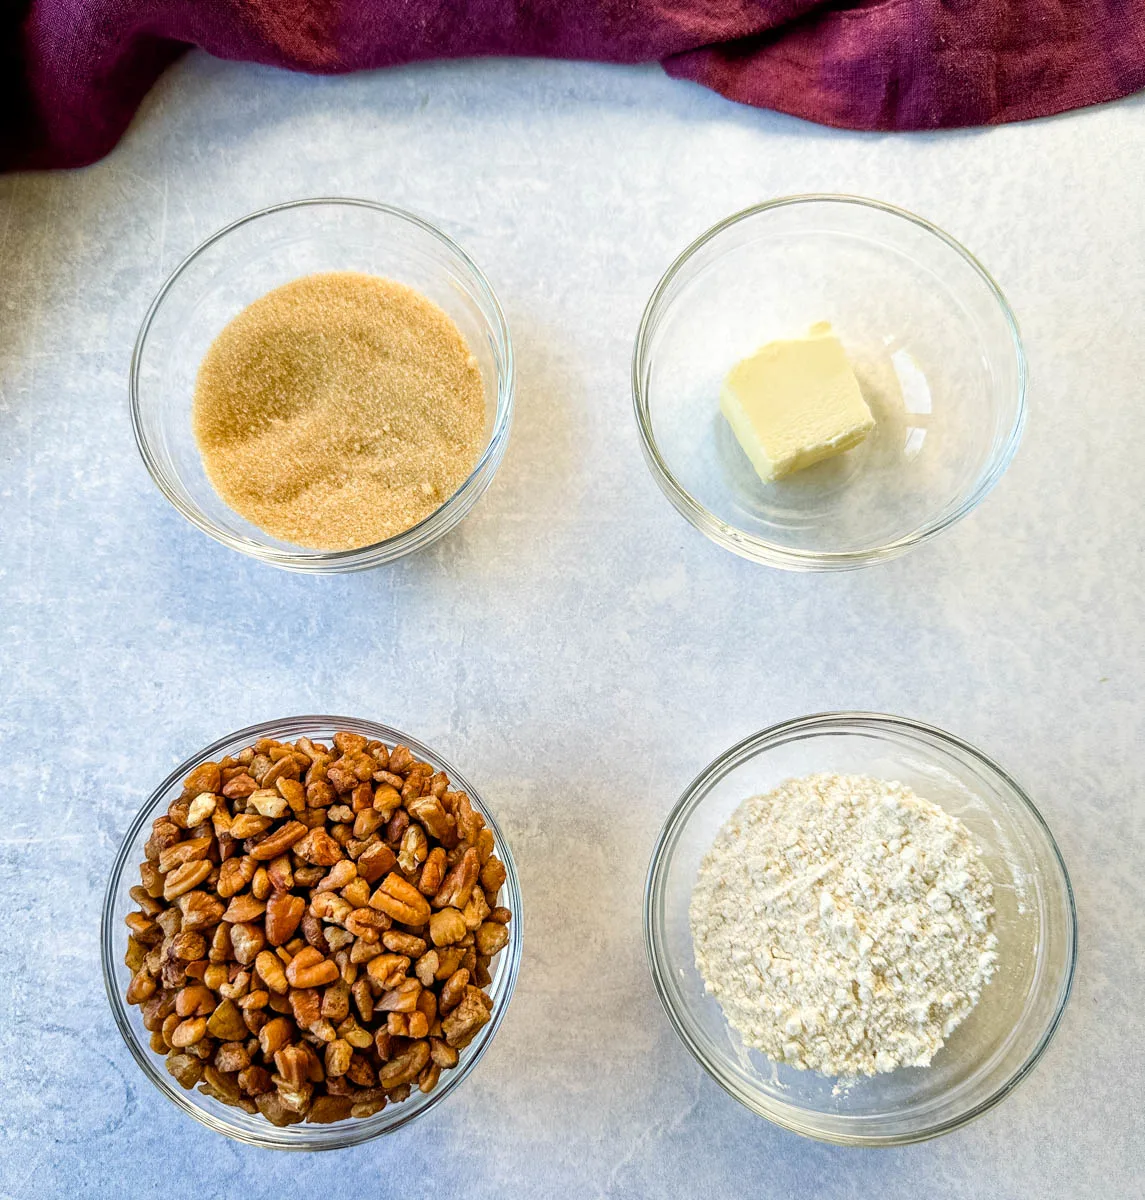 brown sugar or sweetener, pecans, butter, and flour in separate glass bowls